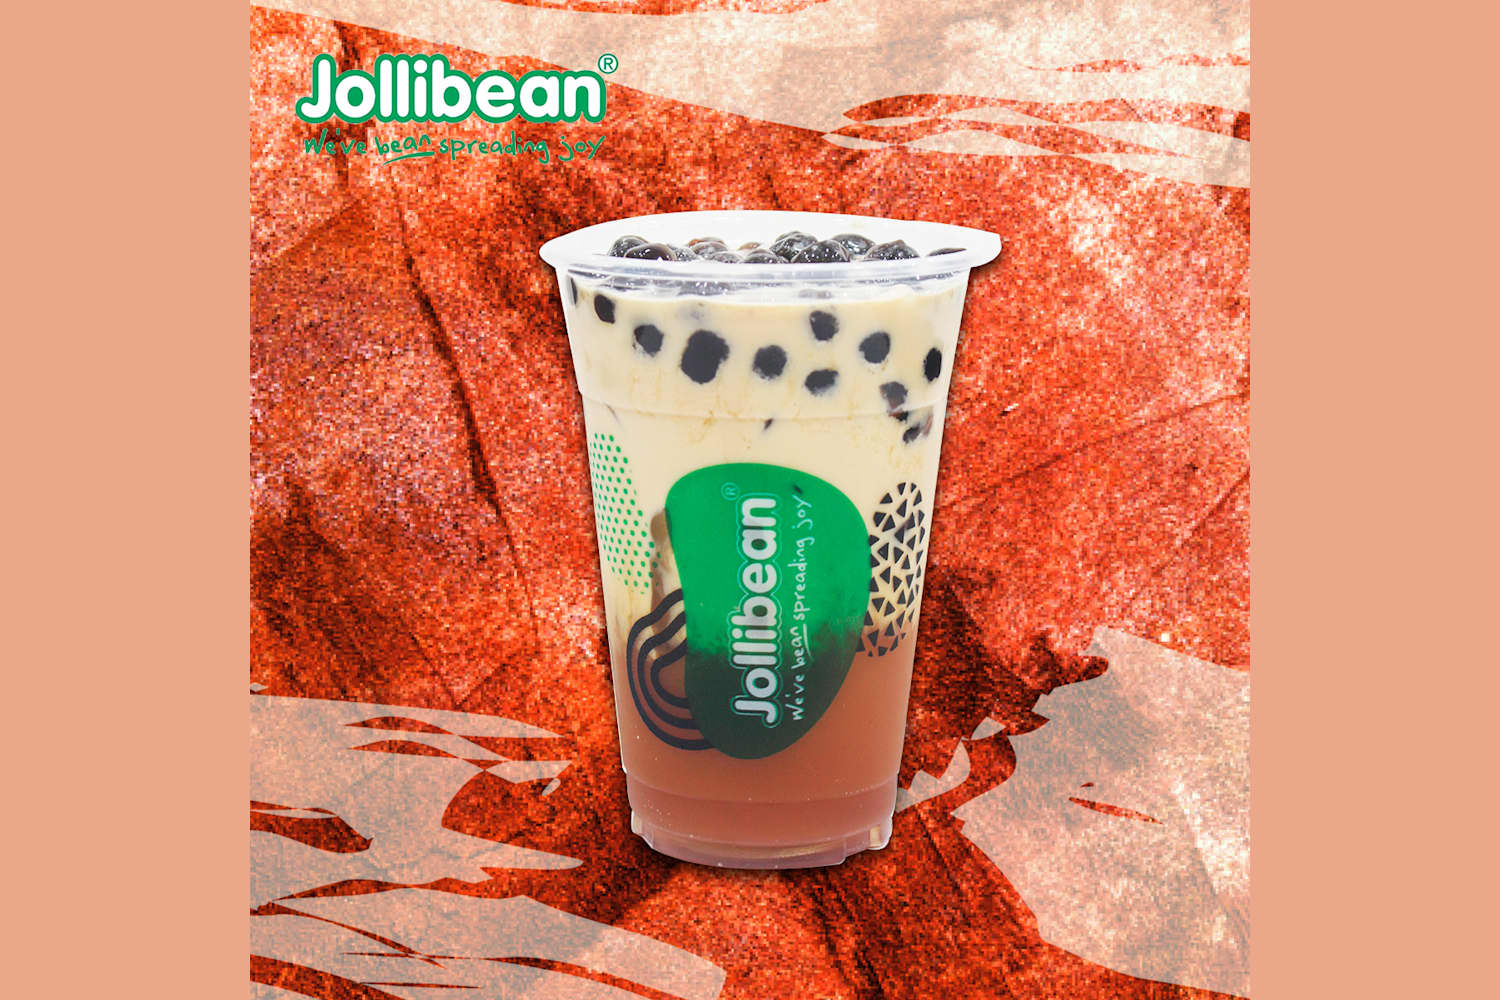 1 x Black Pearl Soy Tea at Jollibean - Get Deals, Cashback and Rewards with ShopBack GO